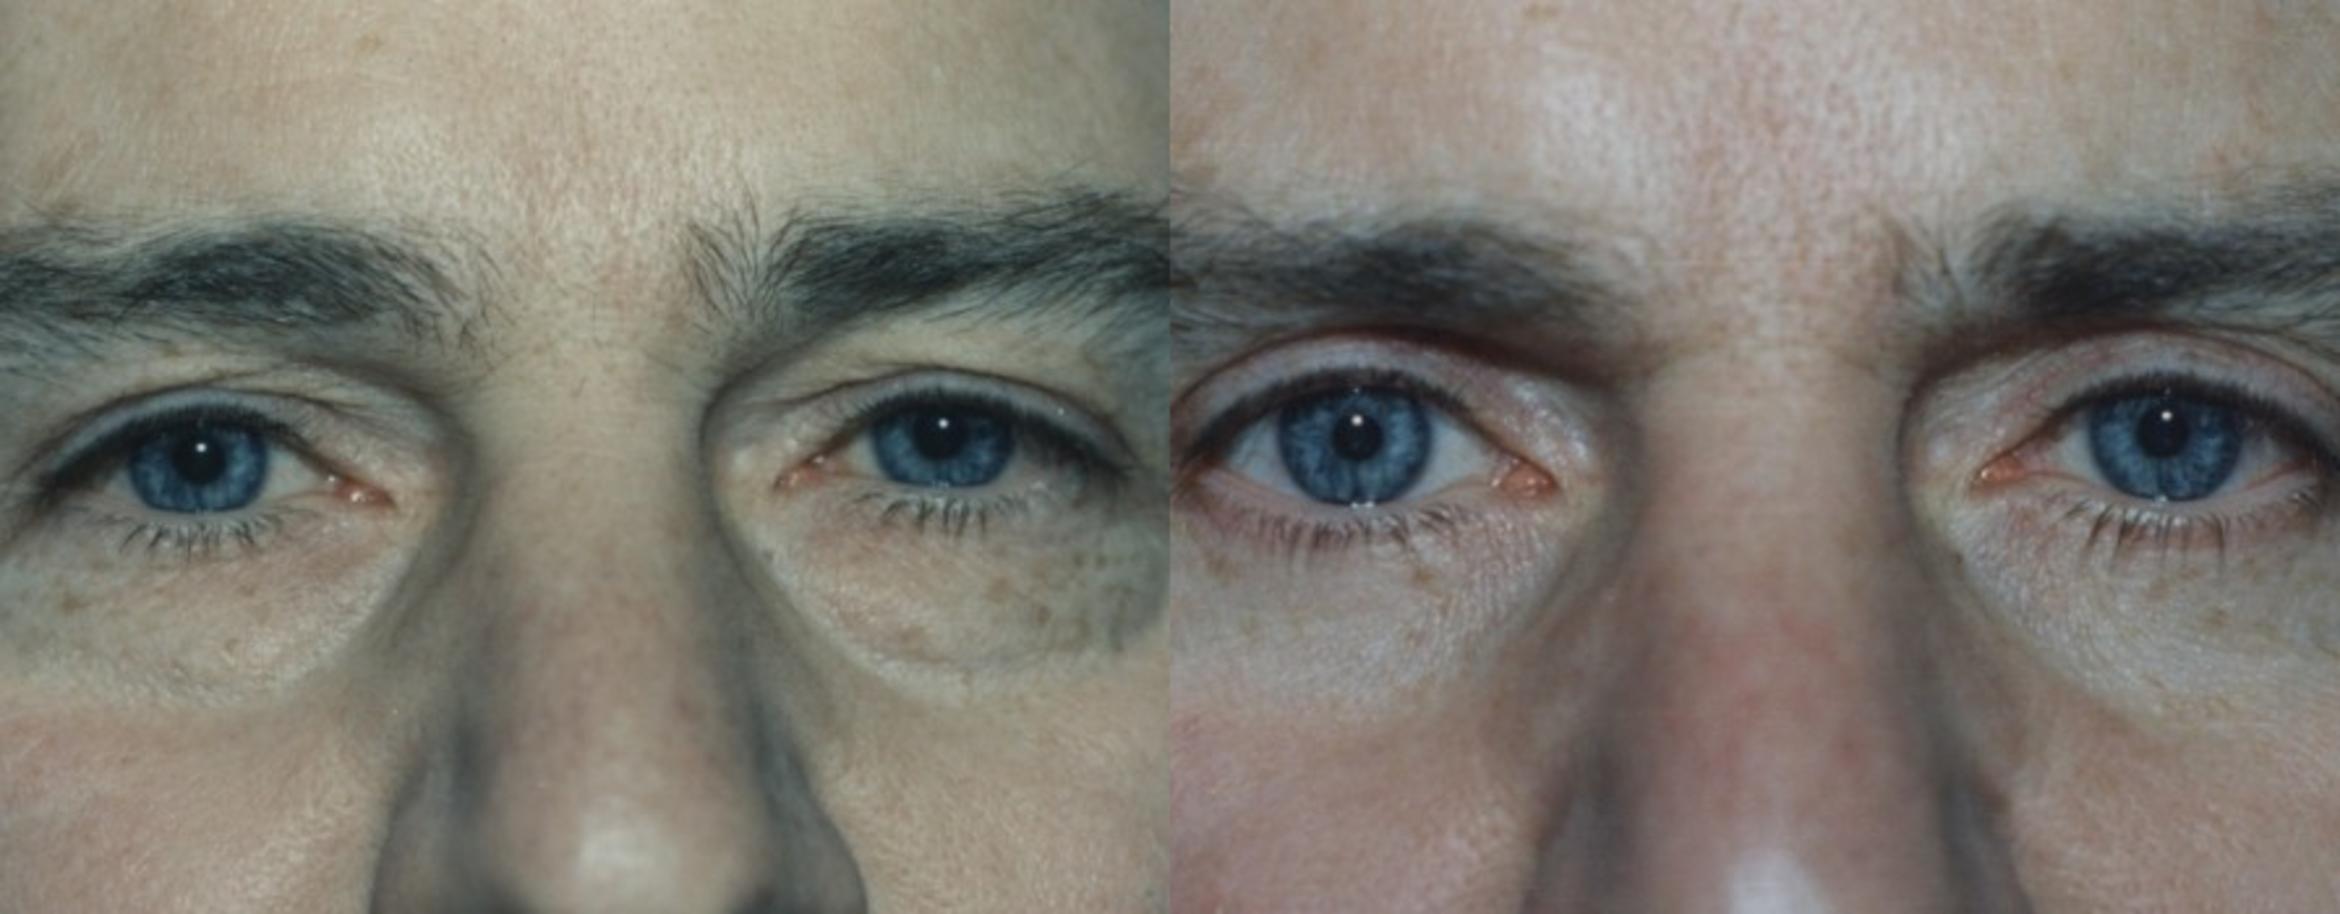 Blepharoplasty Before & After Photo | New Jersey & Pennsylvania,  | The Derm Group